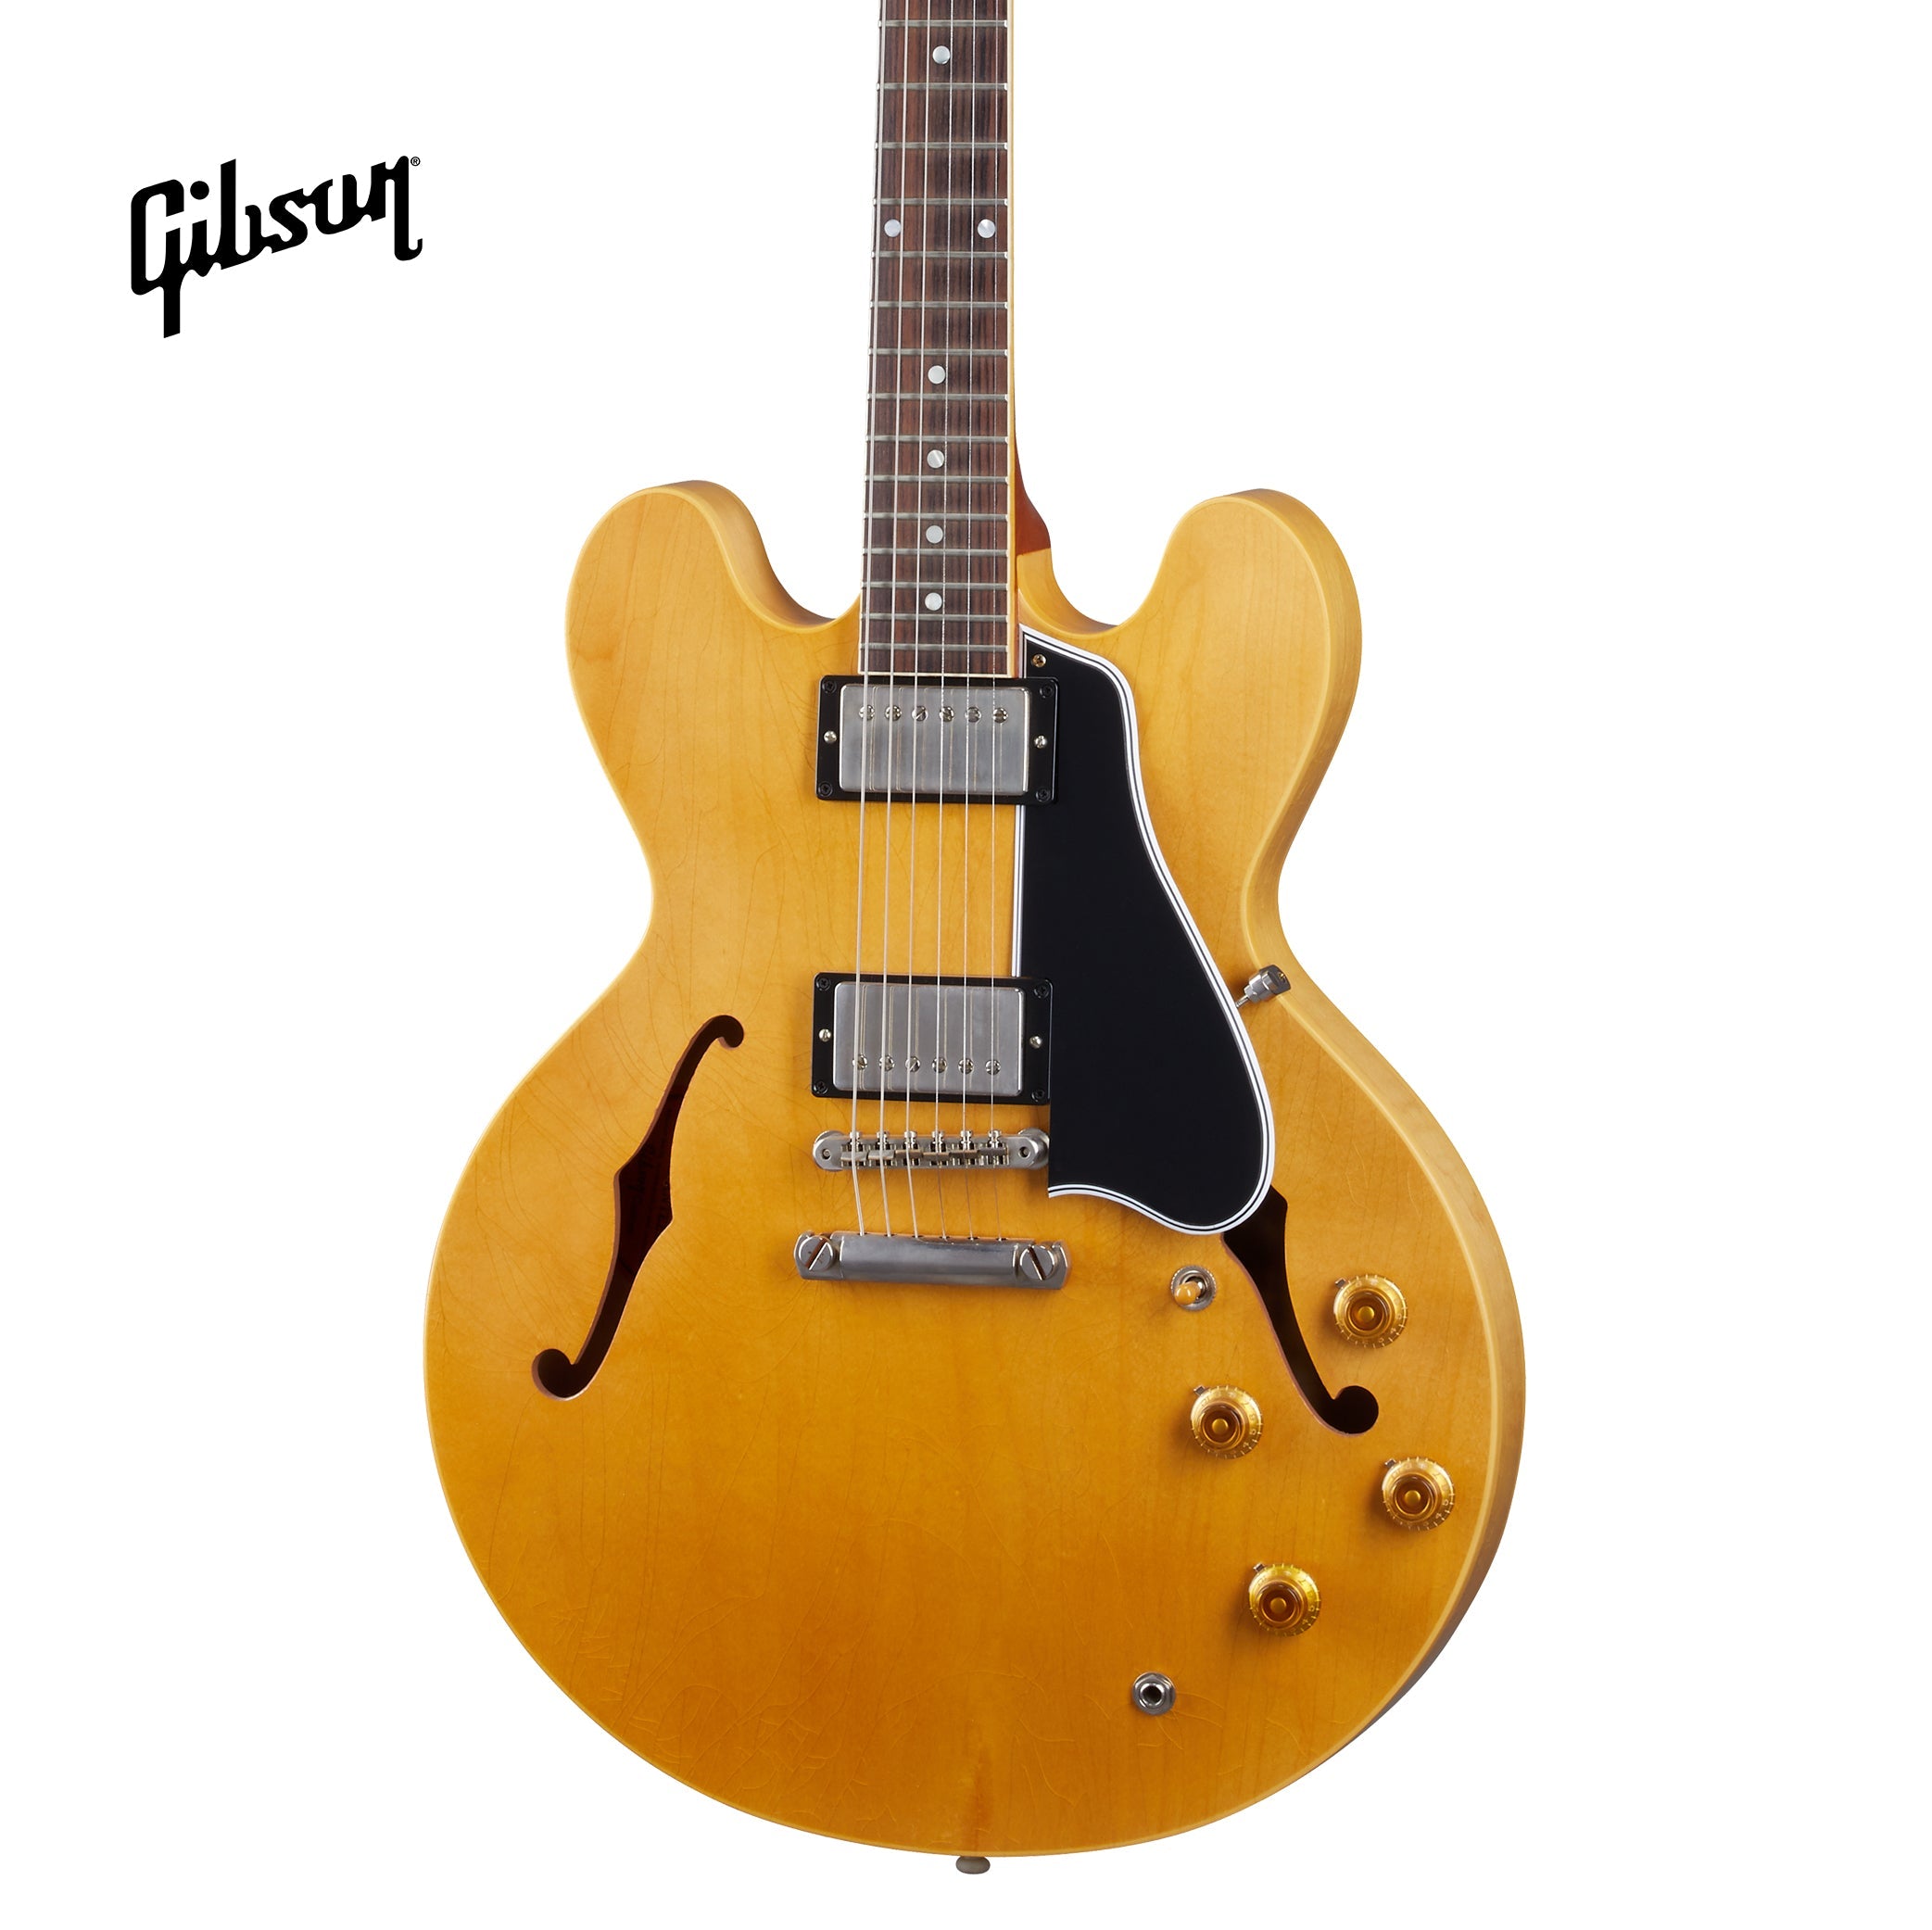 GIBSON 1959 ES-335 REISSUE ULTRA LIGHT AGED SEMI-HOLLOWBODY ELECTRIC GUITAR - VINTAGE NATURAL